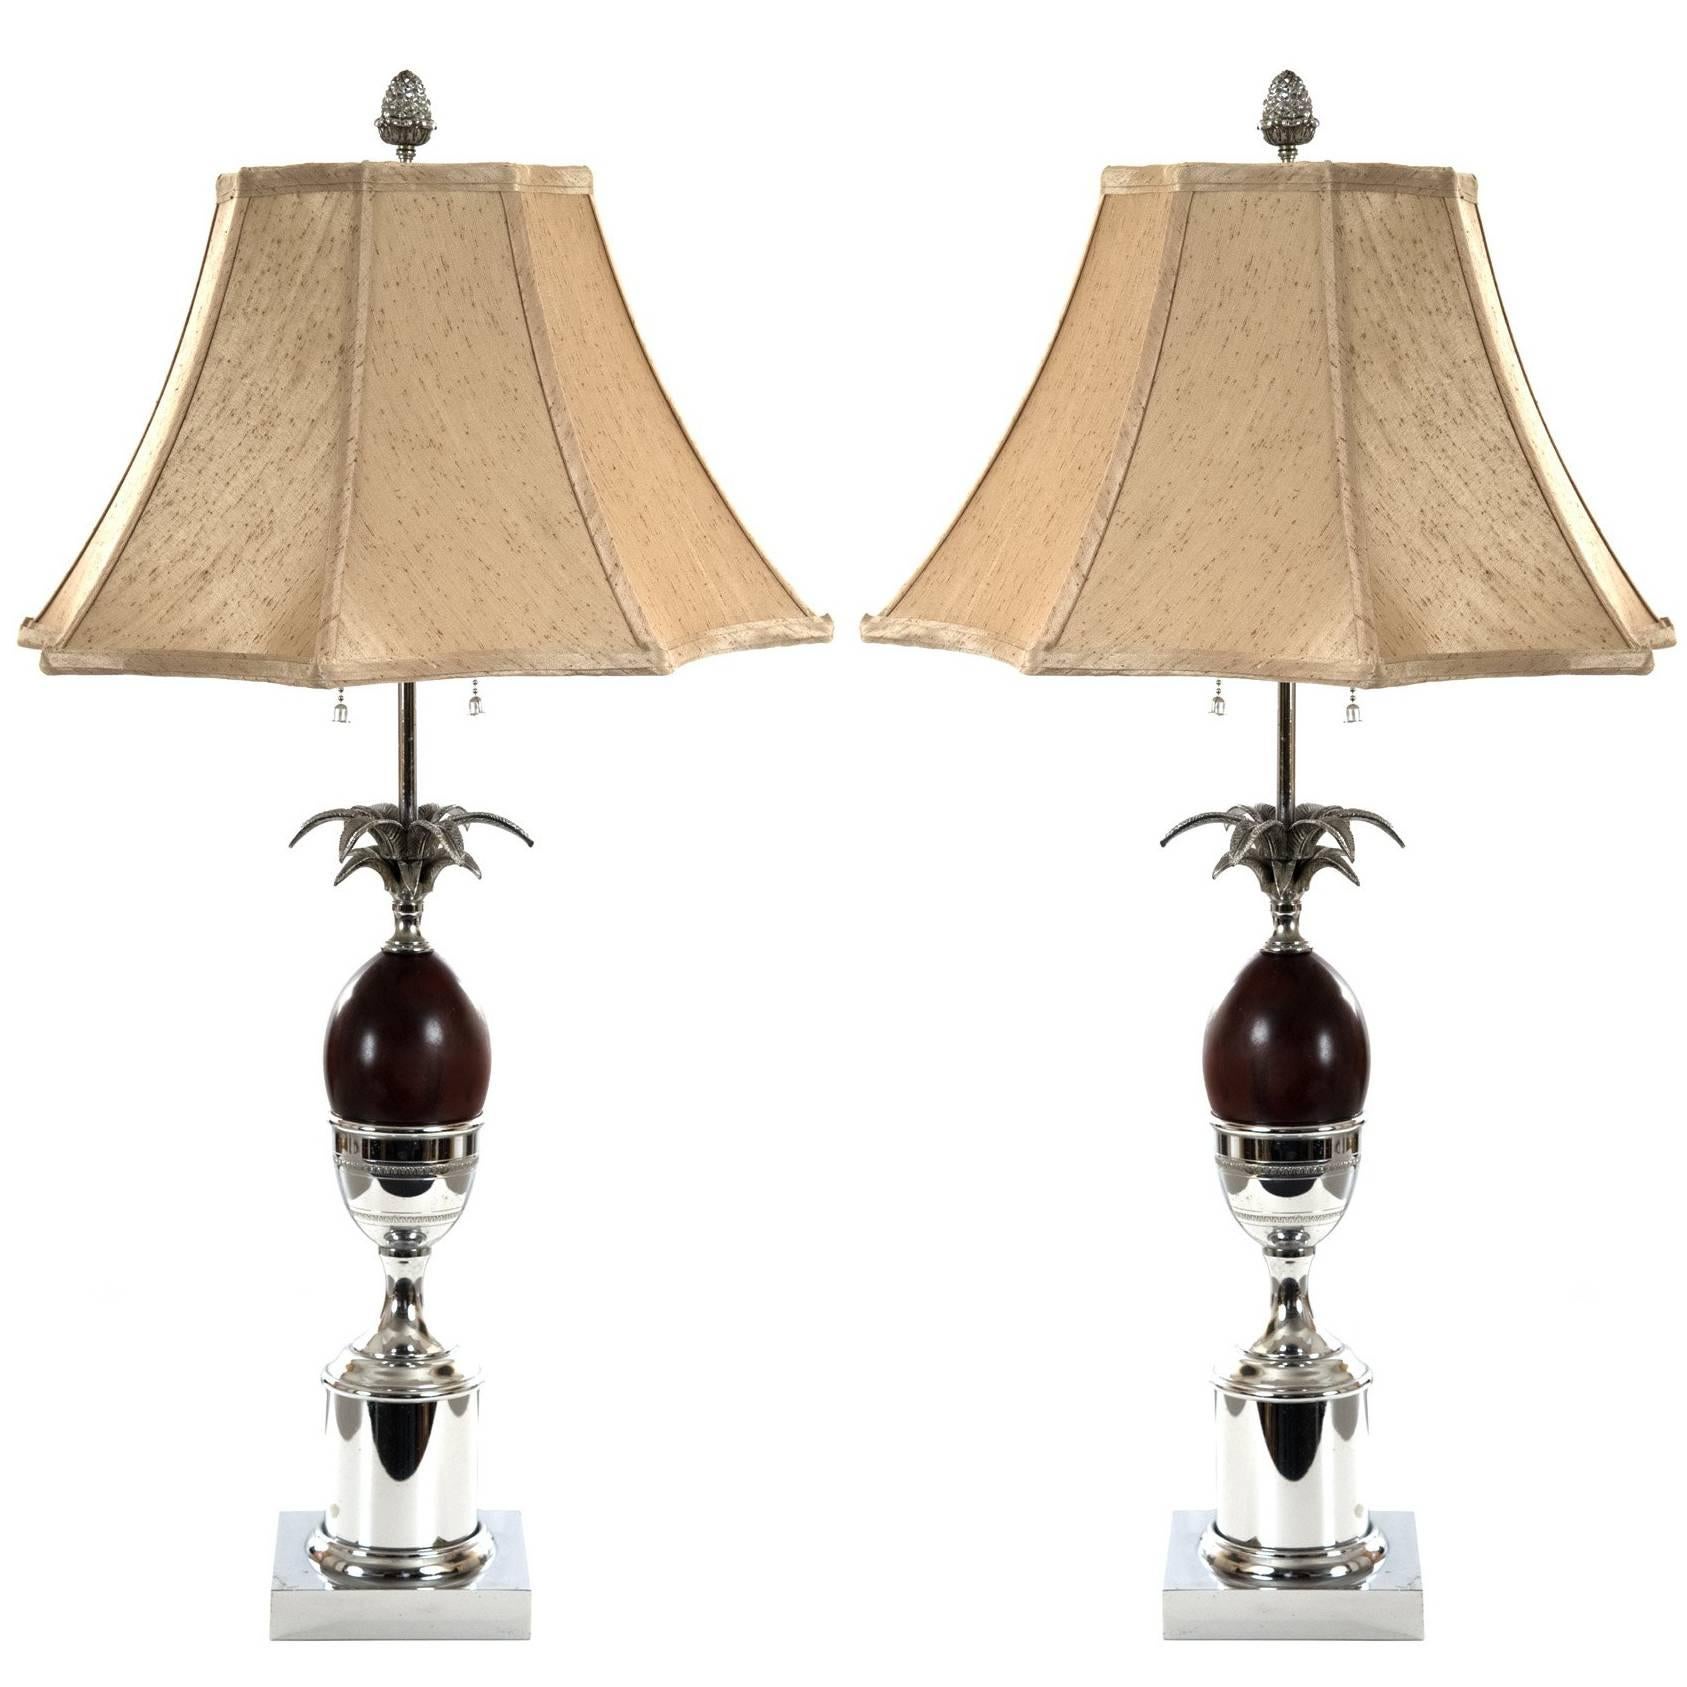 Pair of Chrome and Wood Pineapple Form Table Lamps For Sale